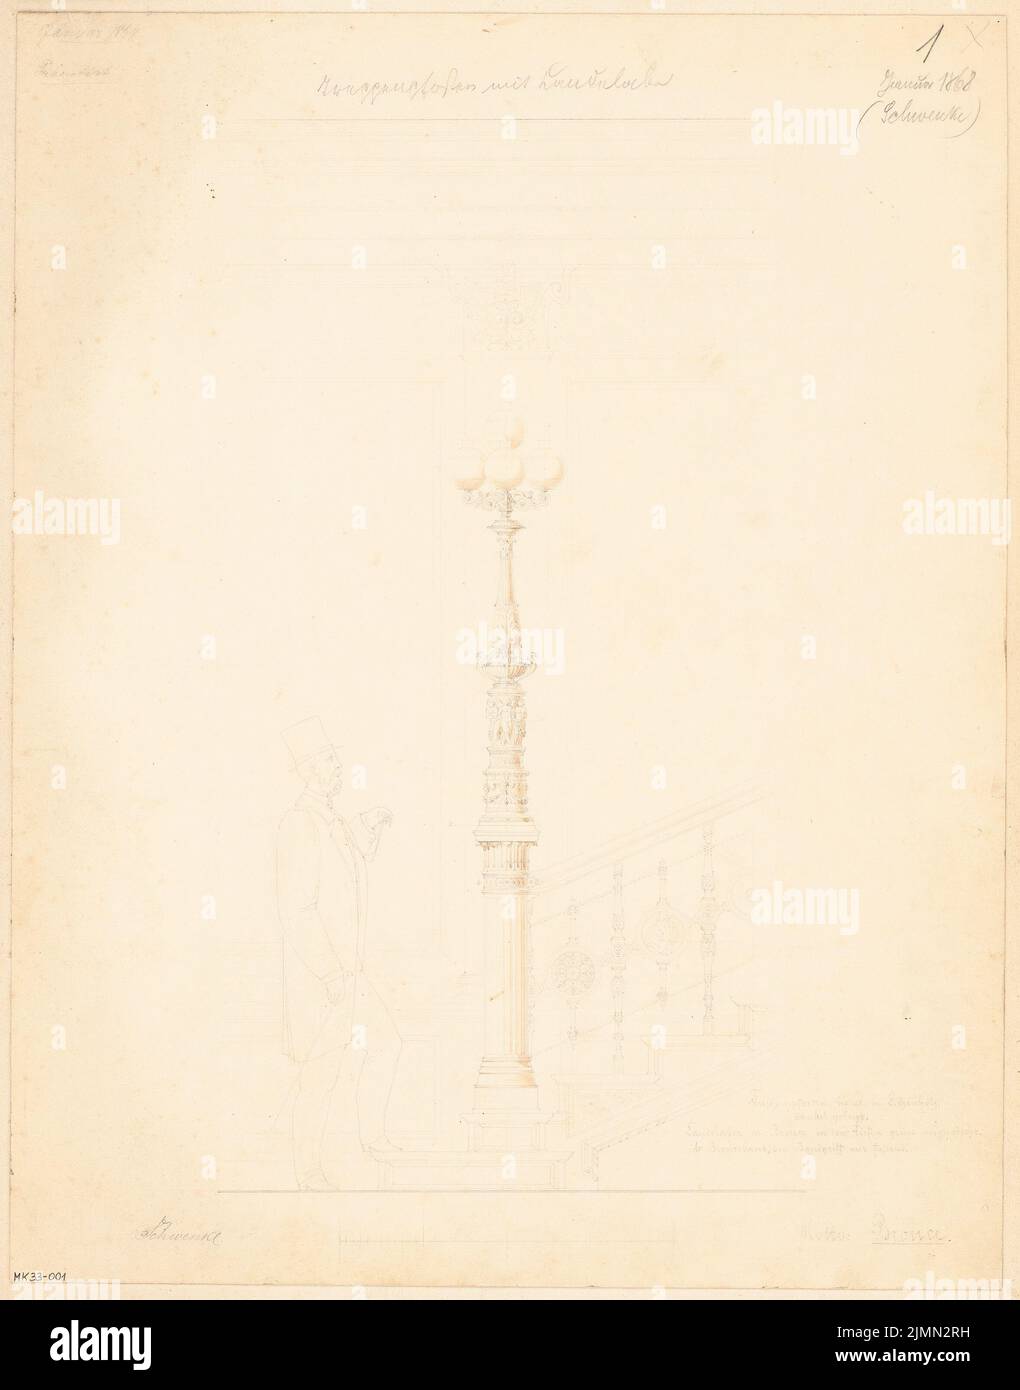 Schwenke Friedrich (born 1840), stair post with candelaber. Monthly competition in January 1868 (01.1868): Riss side view; Scale bar. Pencil watercolor on the box, 46.1 x 36.2 cm (including scan edges) Stock Photo